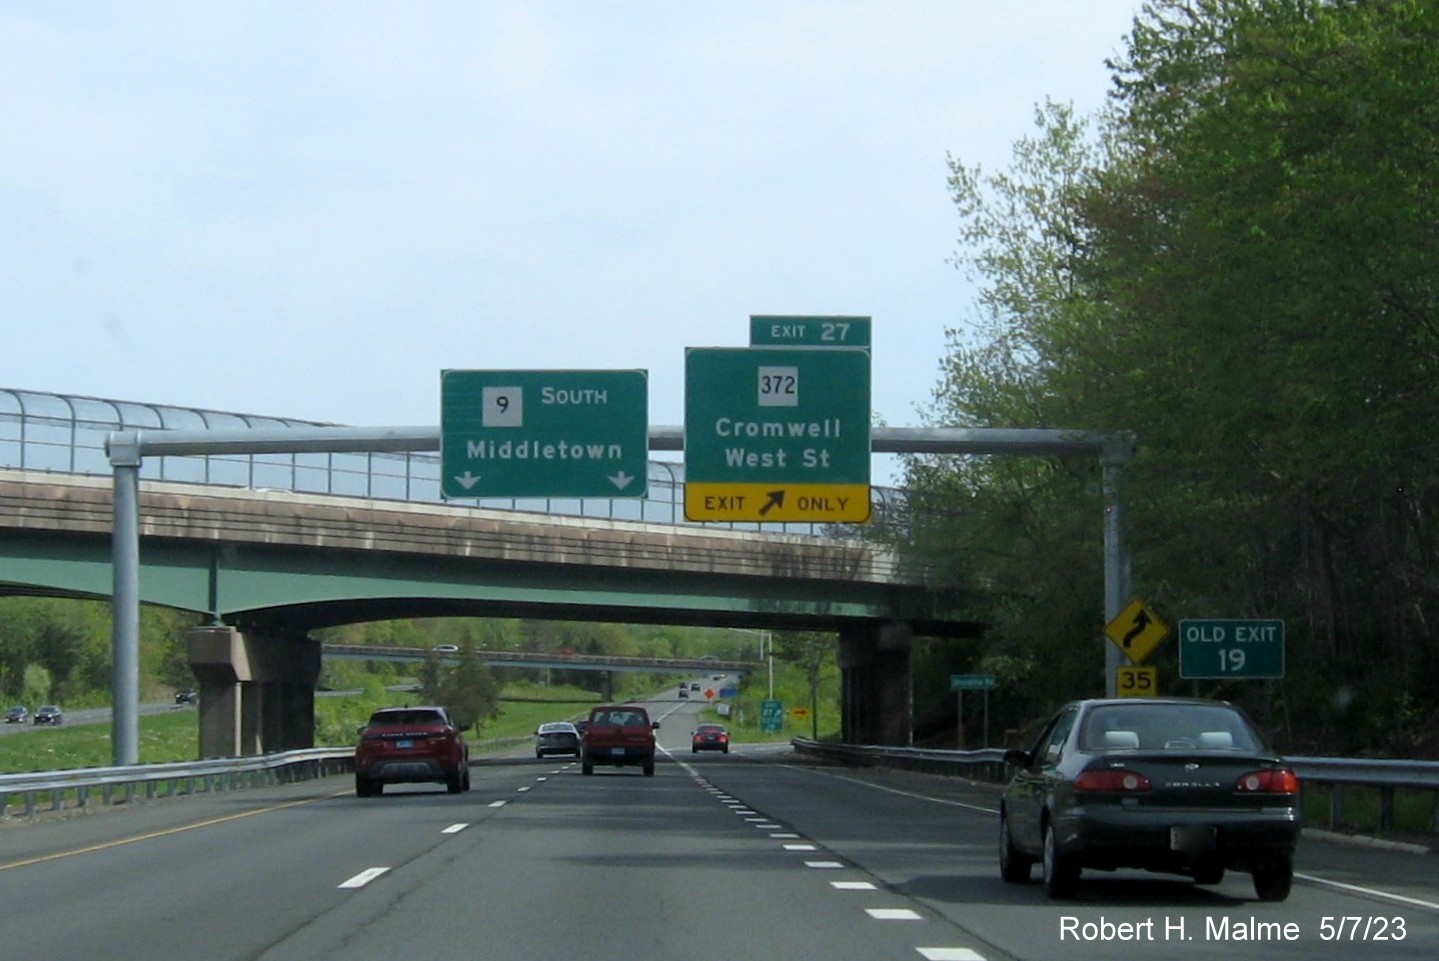 Image of overhead ramp sign for CT 372 exit with new milepost based exit number and separate 
                                     Old Exit 19 sign in front on CT 9 South in Cromwell, May 2023